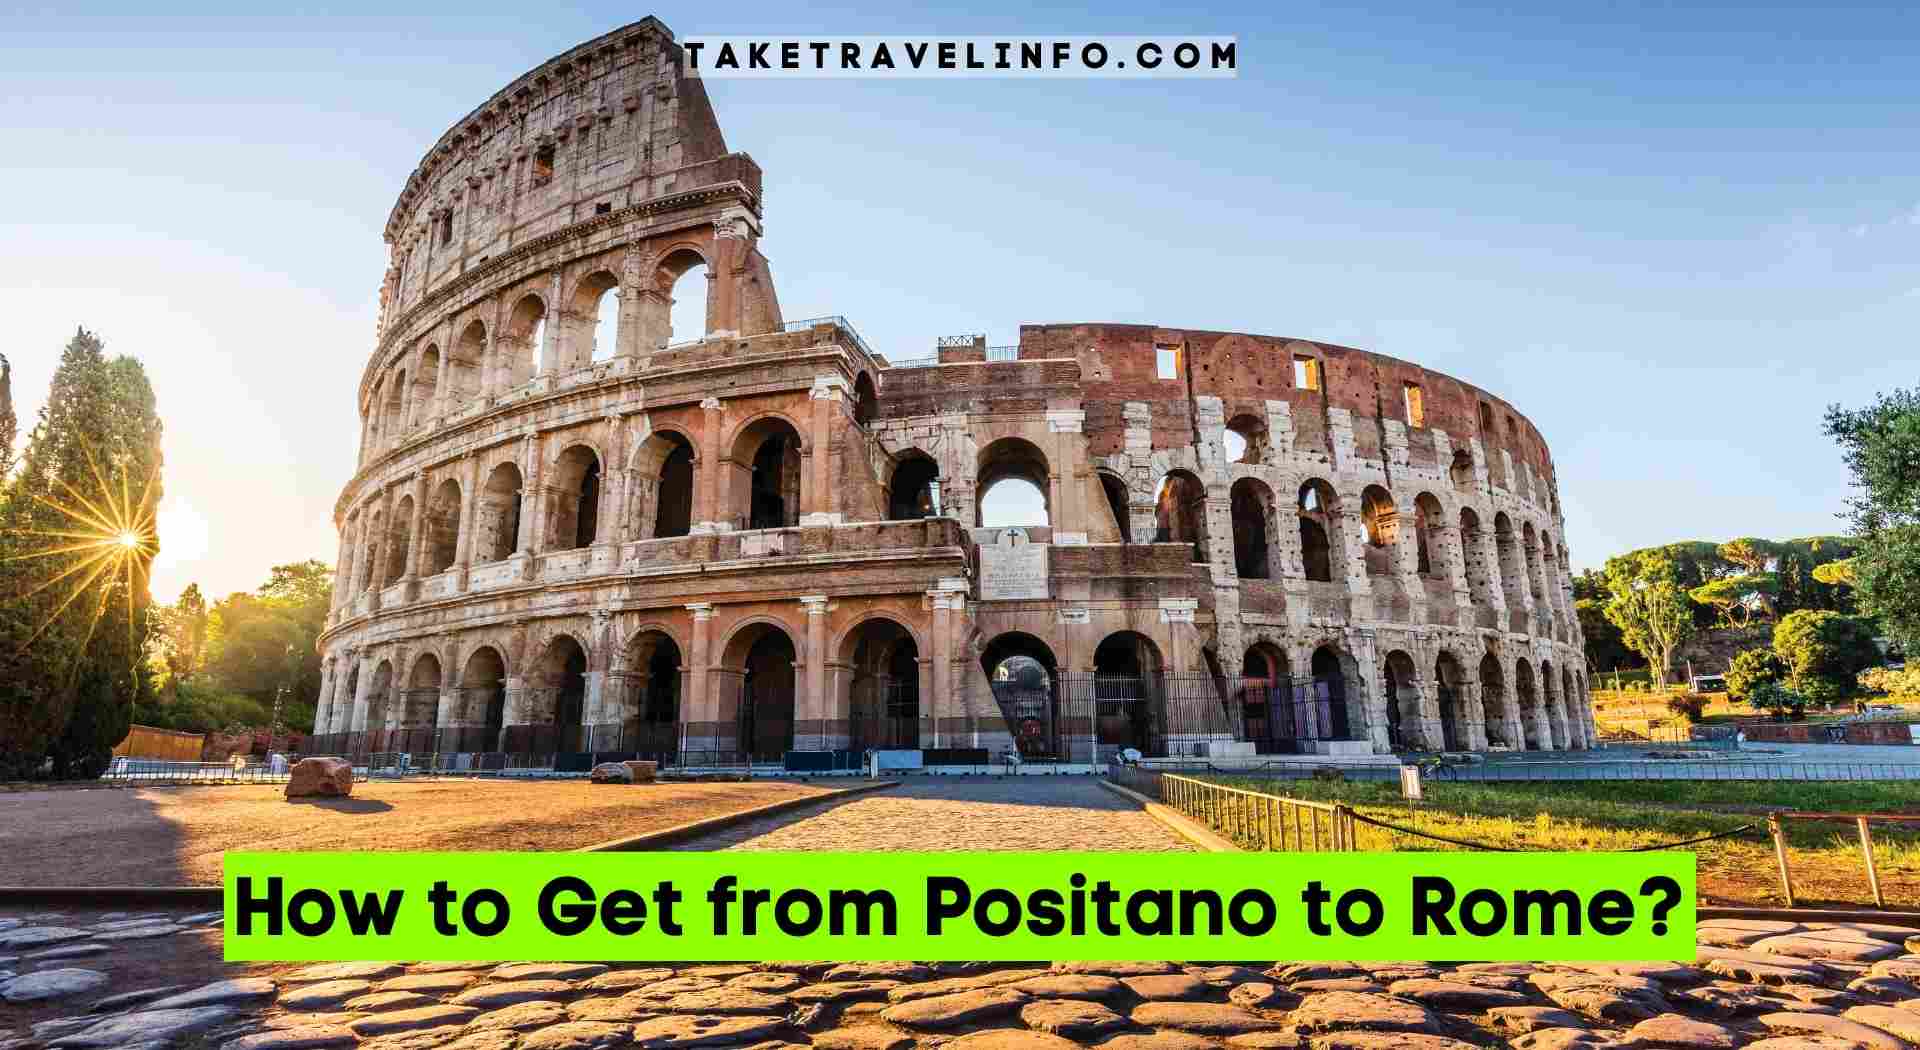 How to Get from Positano to Rome?